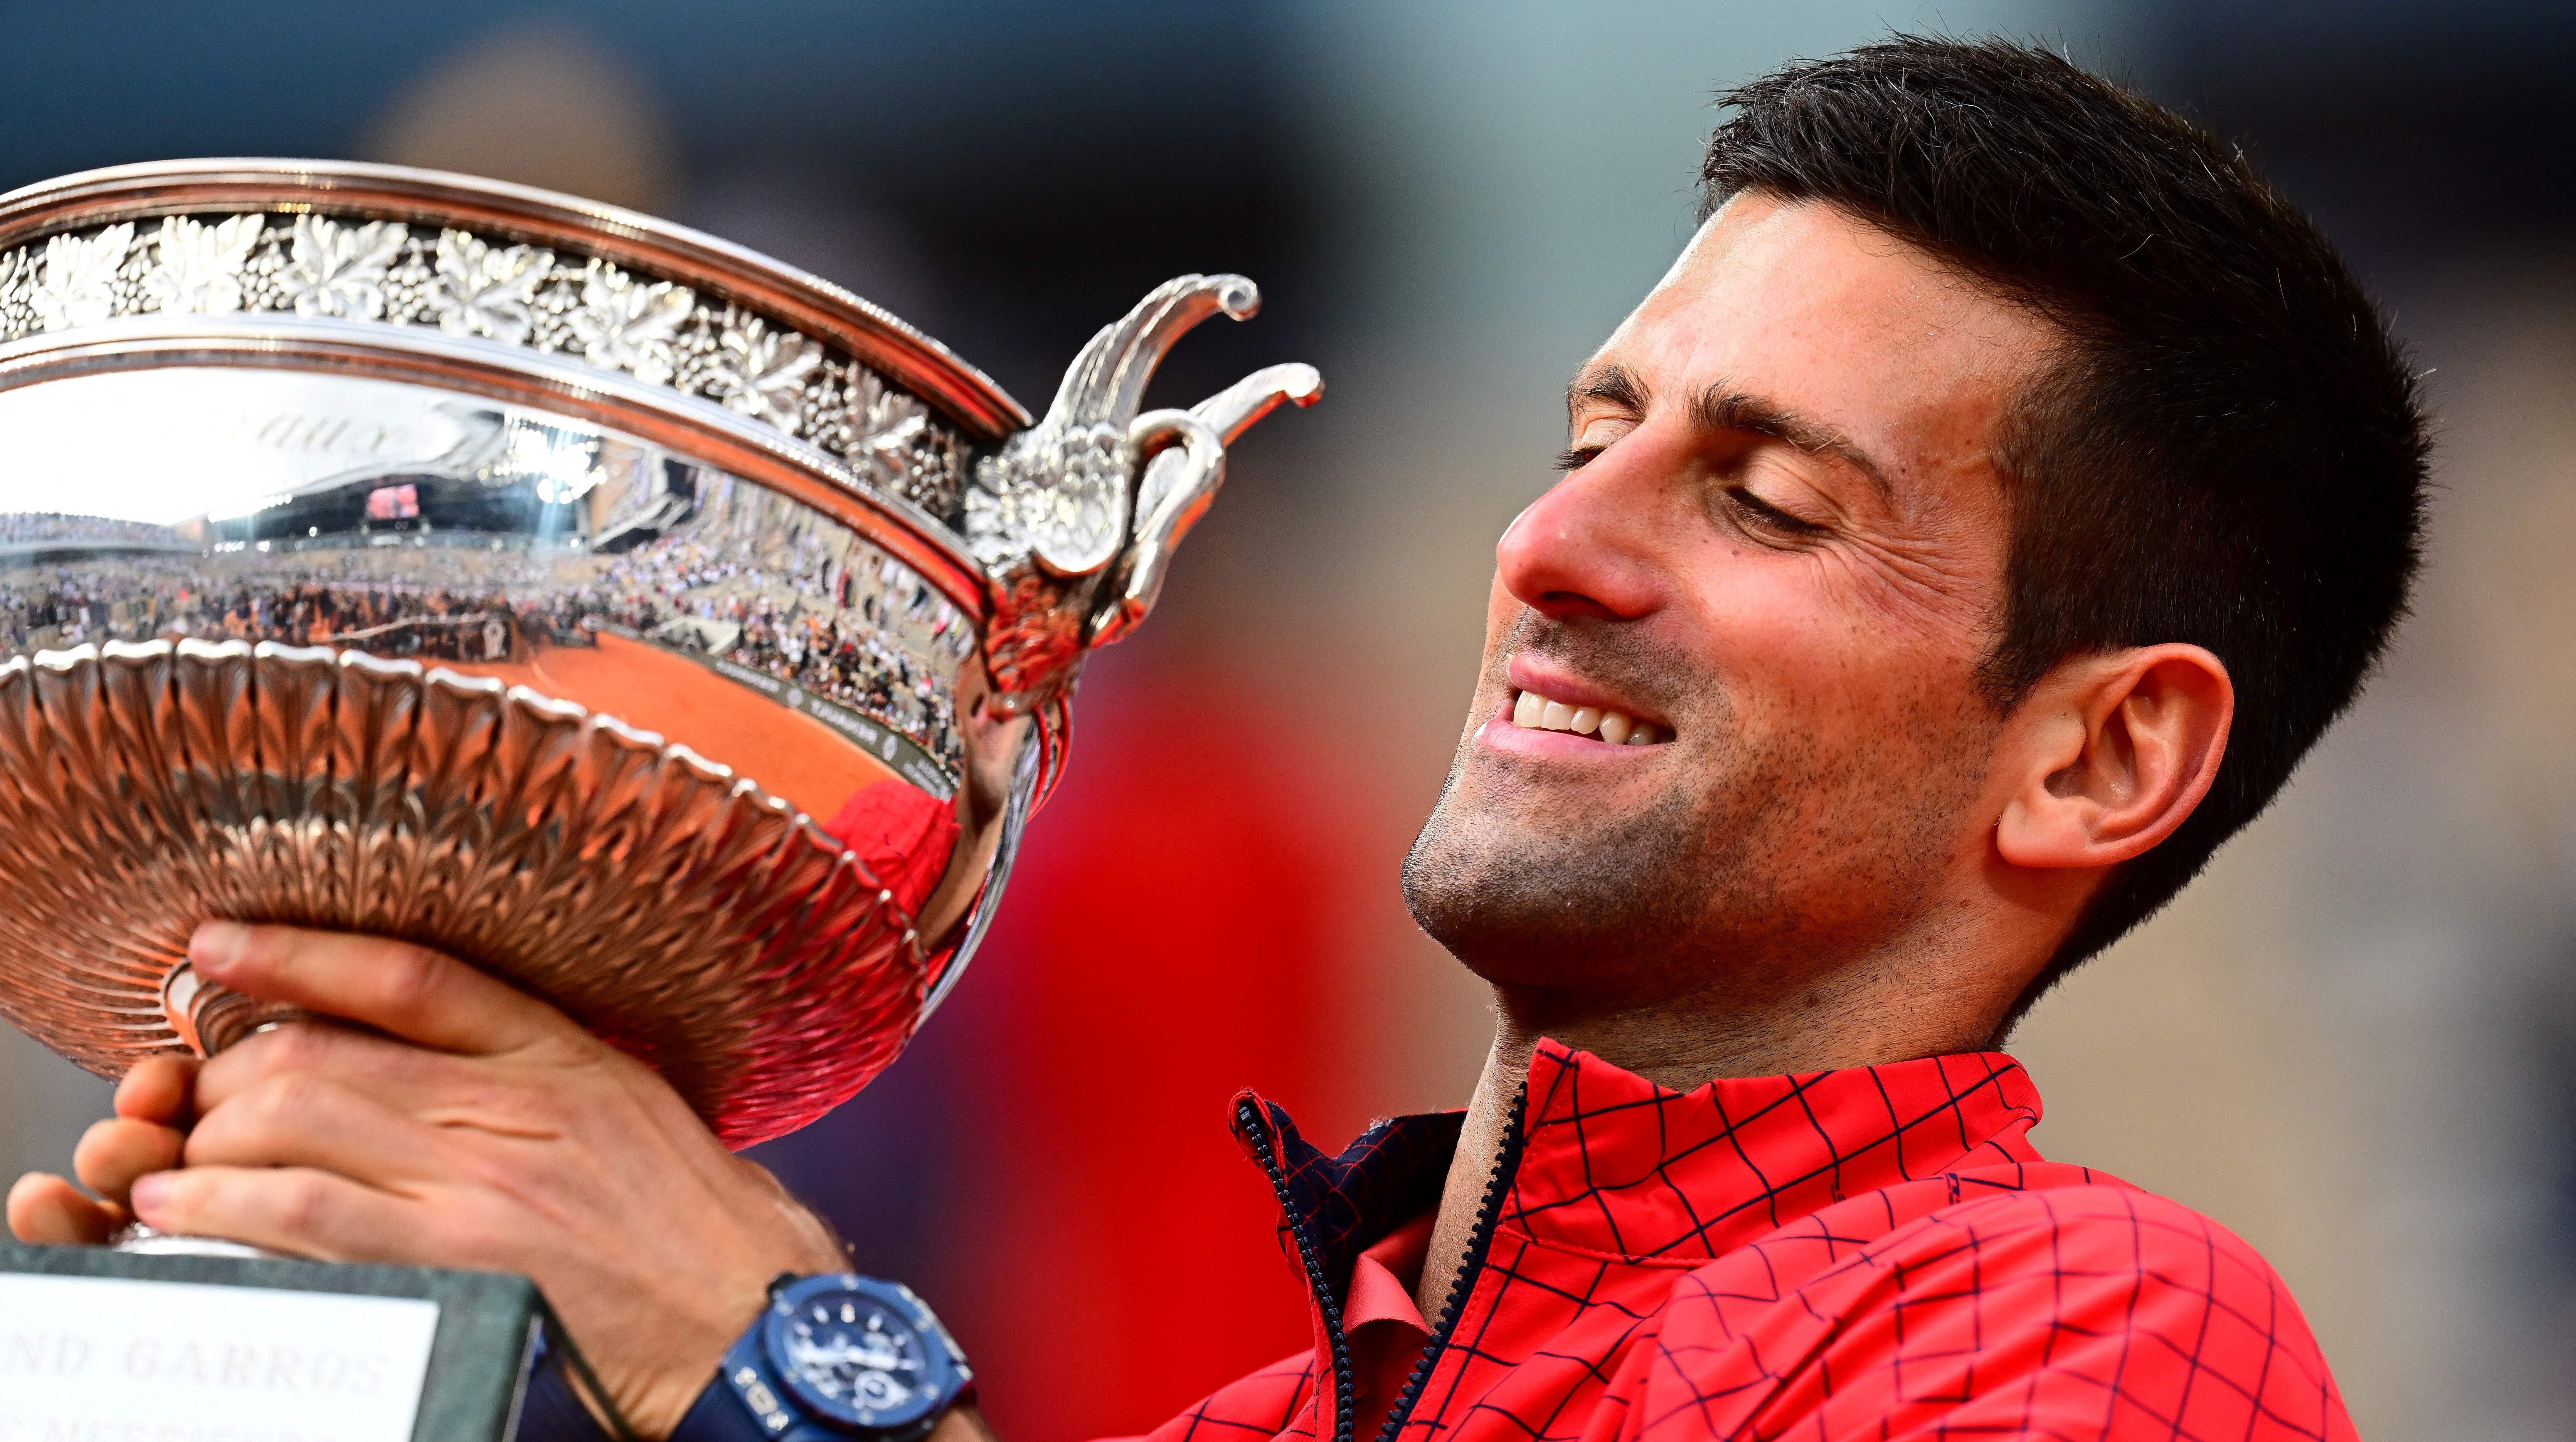 The Open Era: The 20 Greatest Grand Slam Matches of All Time